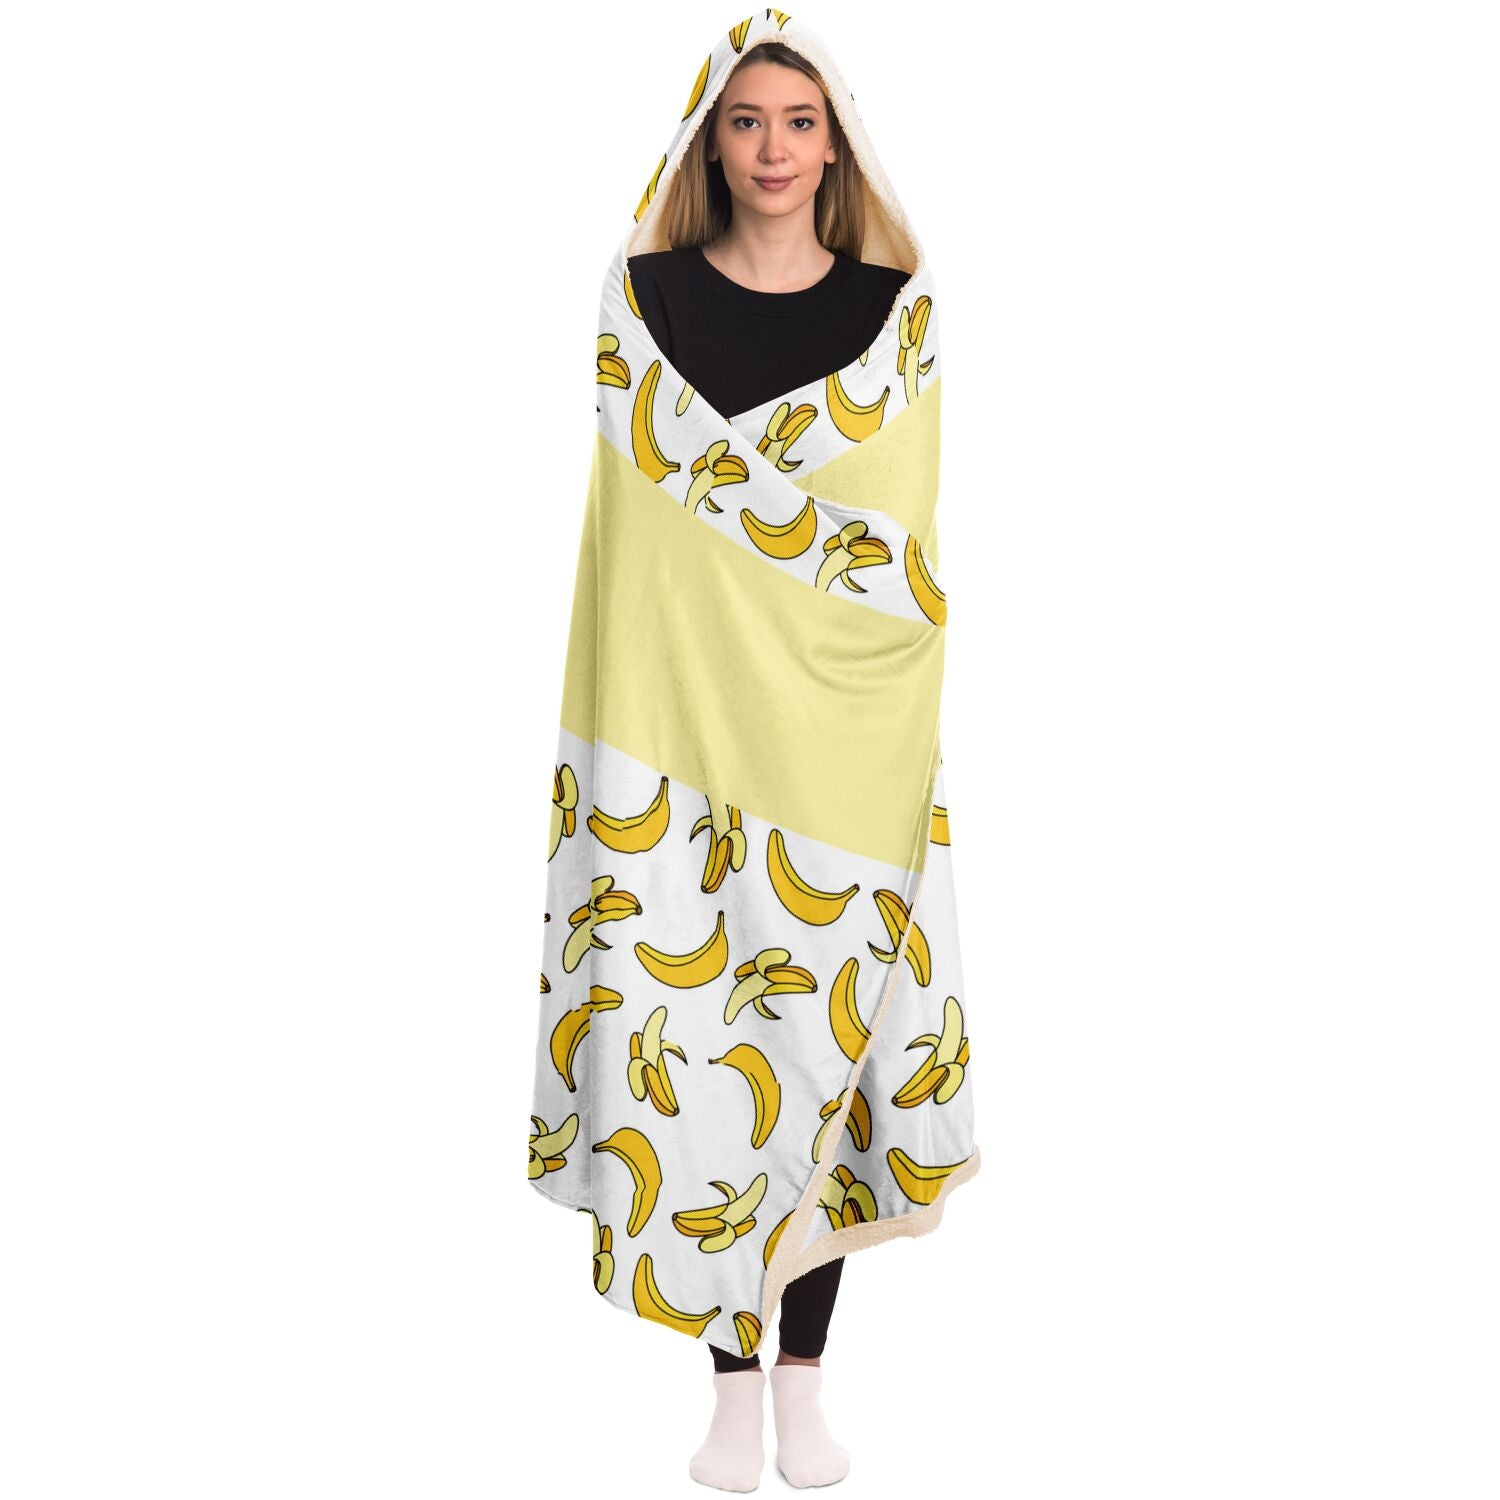 A woman snuggled up in a silky smooth Nana You're The Best Blanket Hoodie with Banana Pattern made of micro-mink polyester by Subliminator.